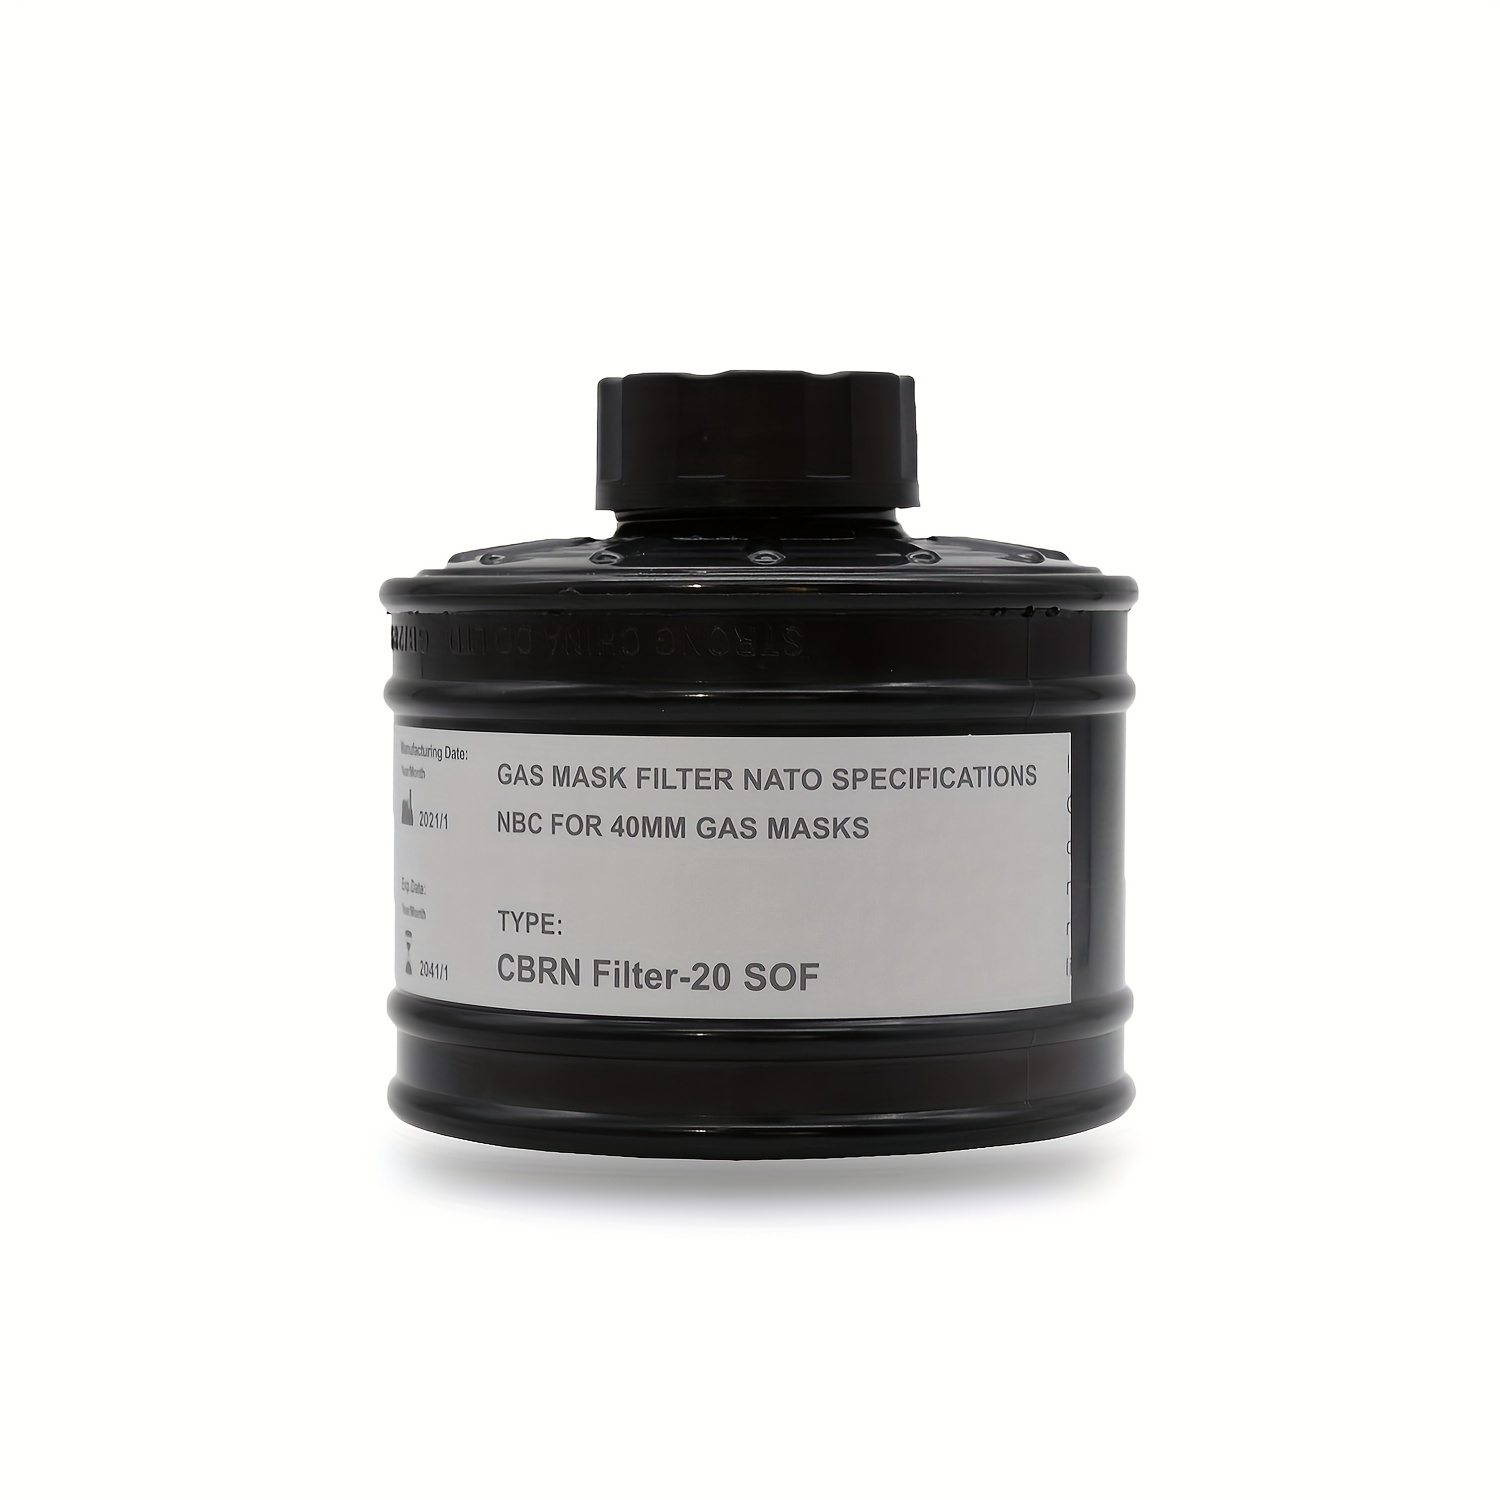 

Gas Mask Filter Specifications Nbc For 40mm Gas Masks Filter With Long Shelf Life 20 Years